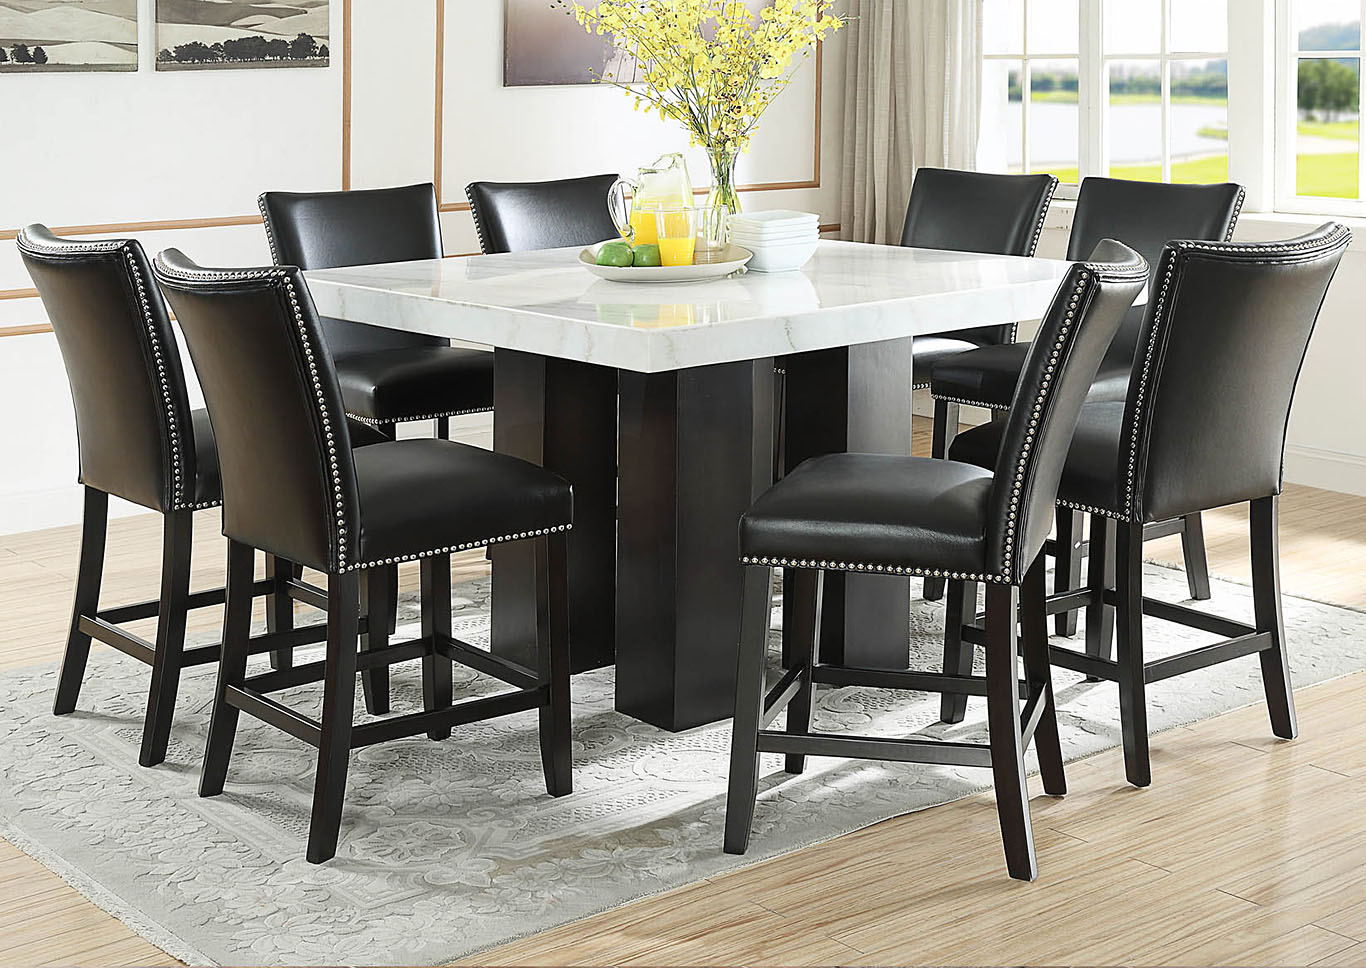 Camila Brown Square Counter Marble Top Dining Set W/ 8 Chairs [Black PU]